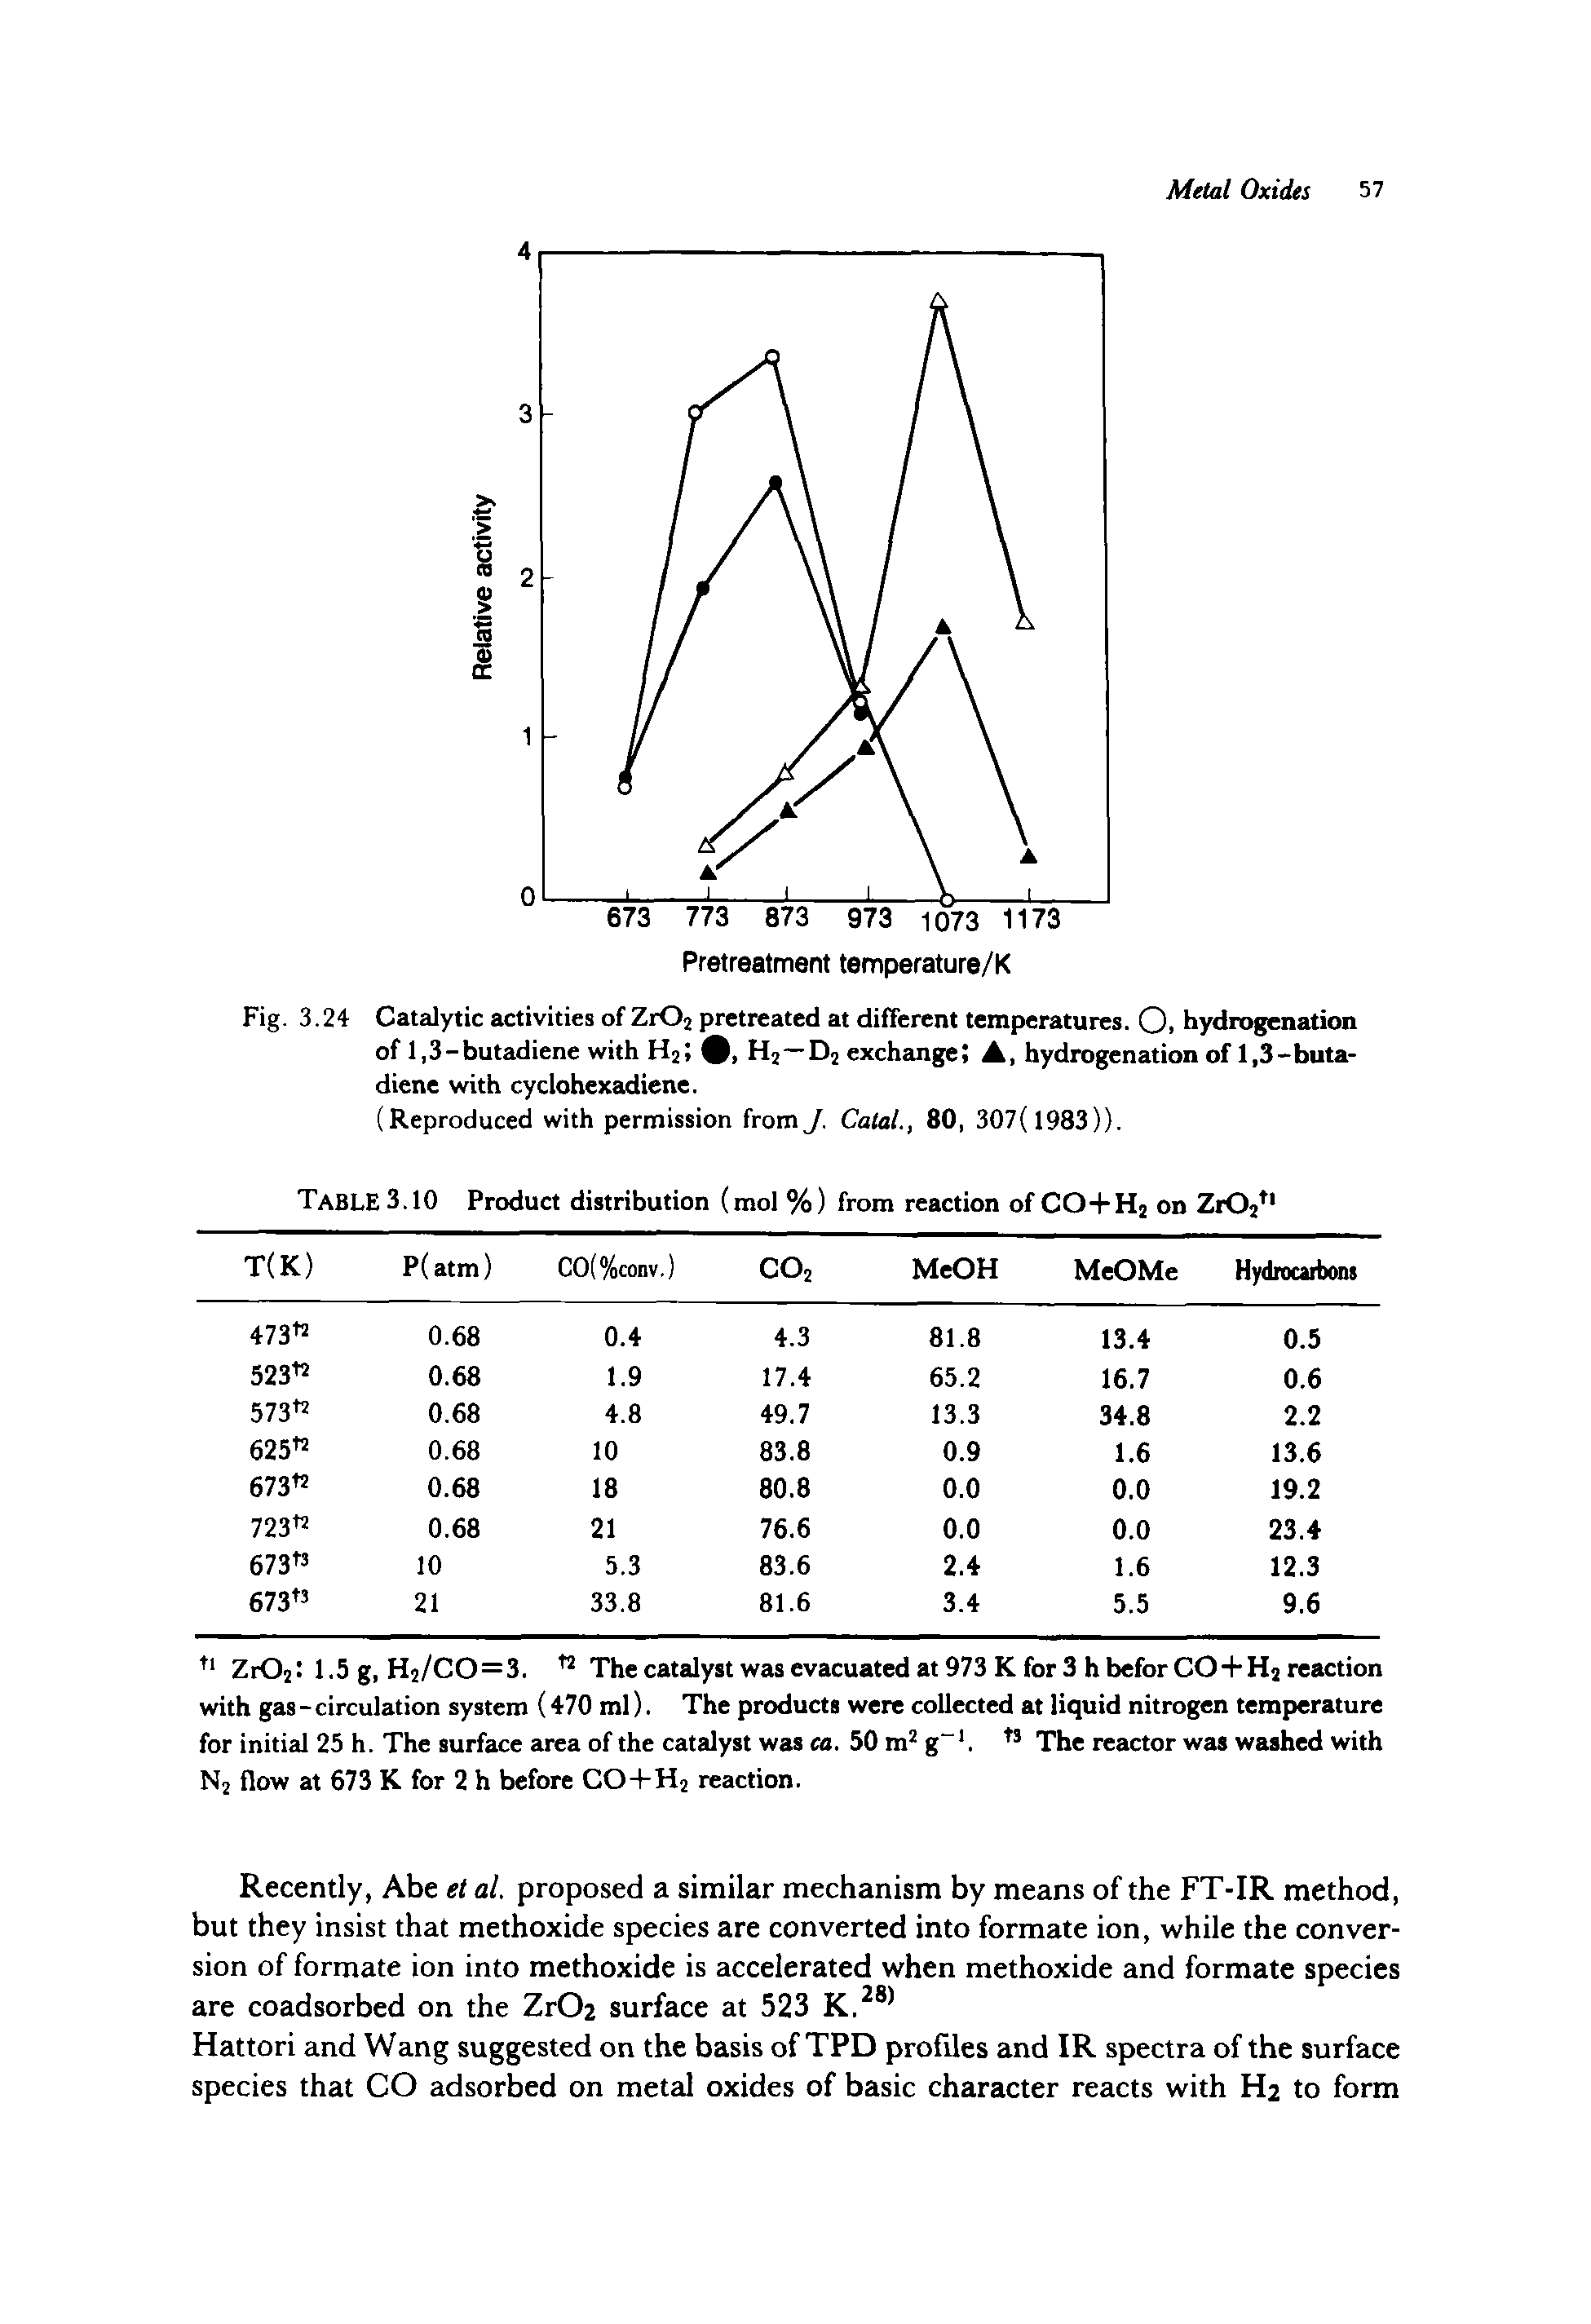 Fig. 3.24 Catalytic activities of ZrOj pretreated at different temperatures. O. hydrogenation of 1,3-butadiene with Hjl %, Hj—Dj exchange A, hydrogenation of 1,3-buta-diene with cyclohexadiene.